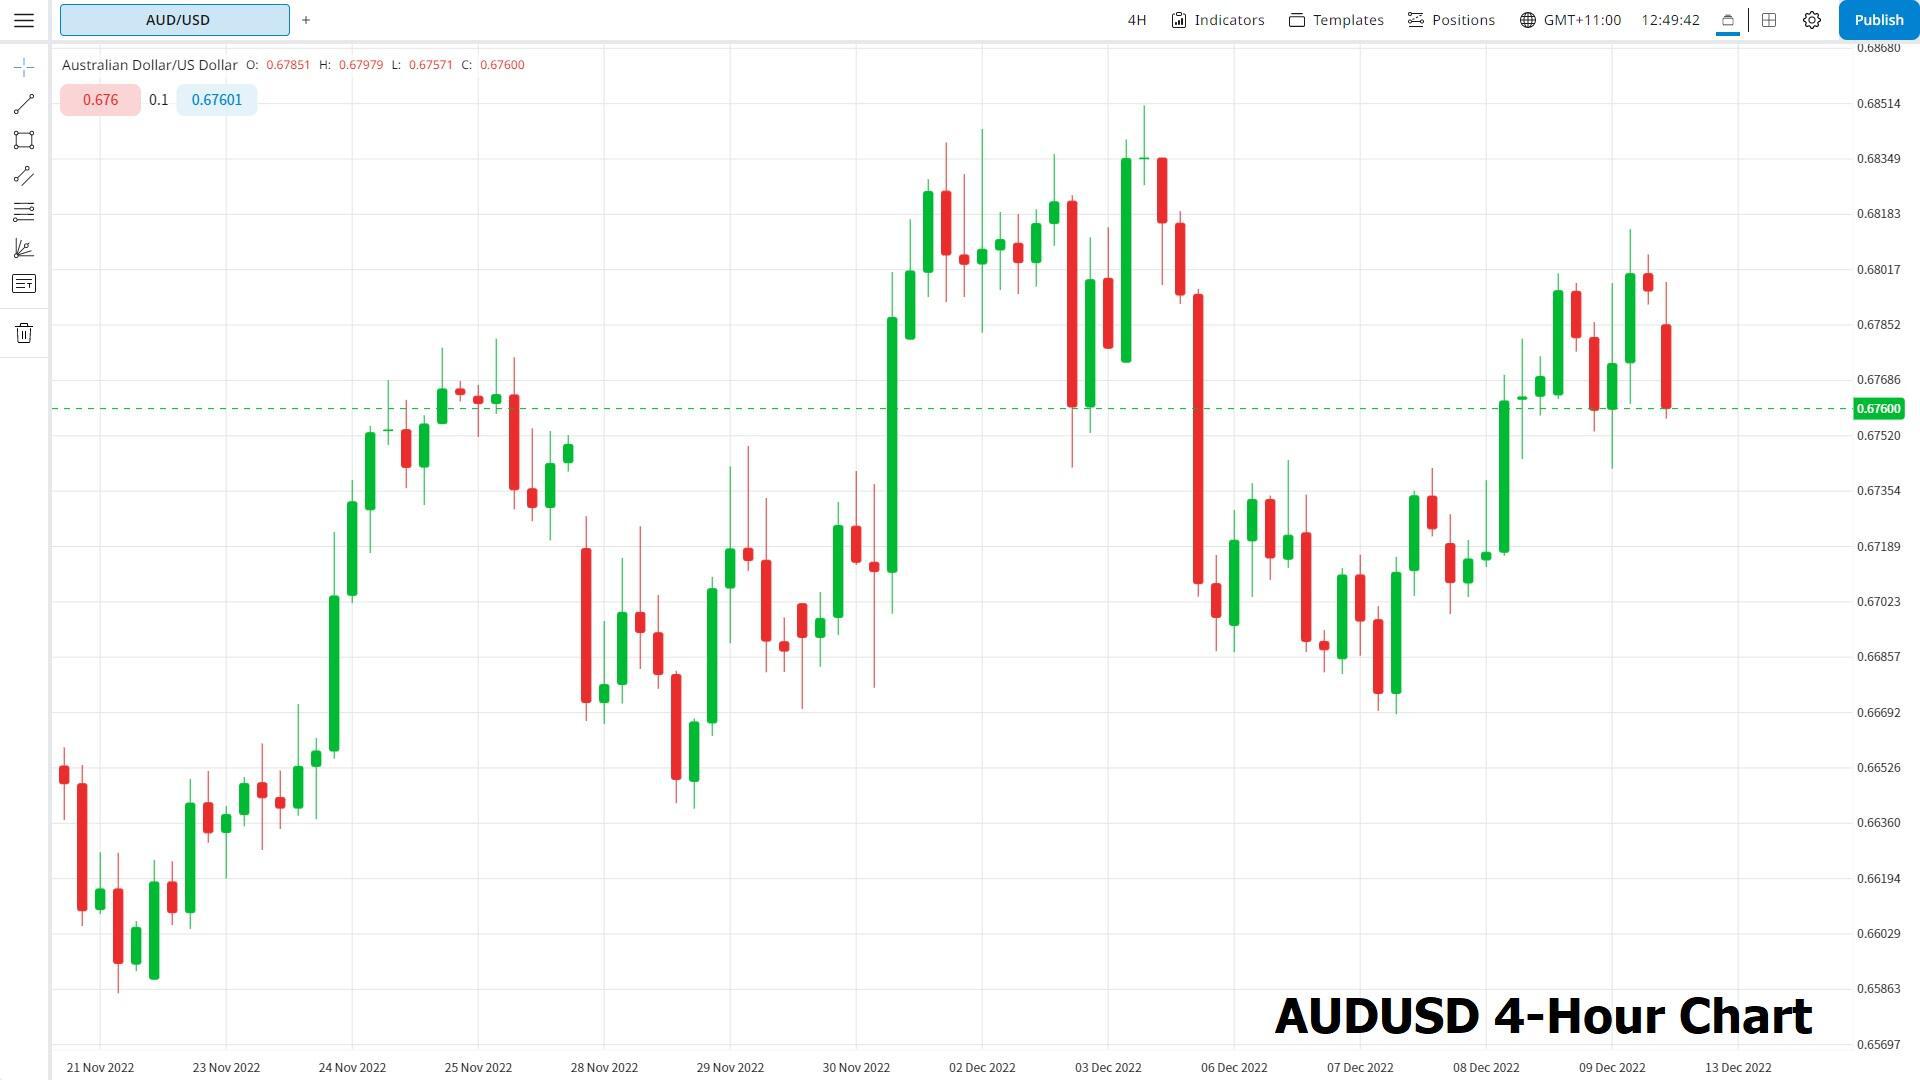 Dollar and yields recover, EUR/USD and USD/CHF Weaken, AUD/USD Firms